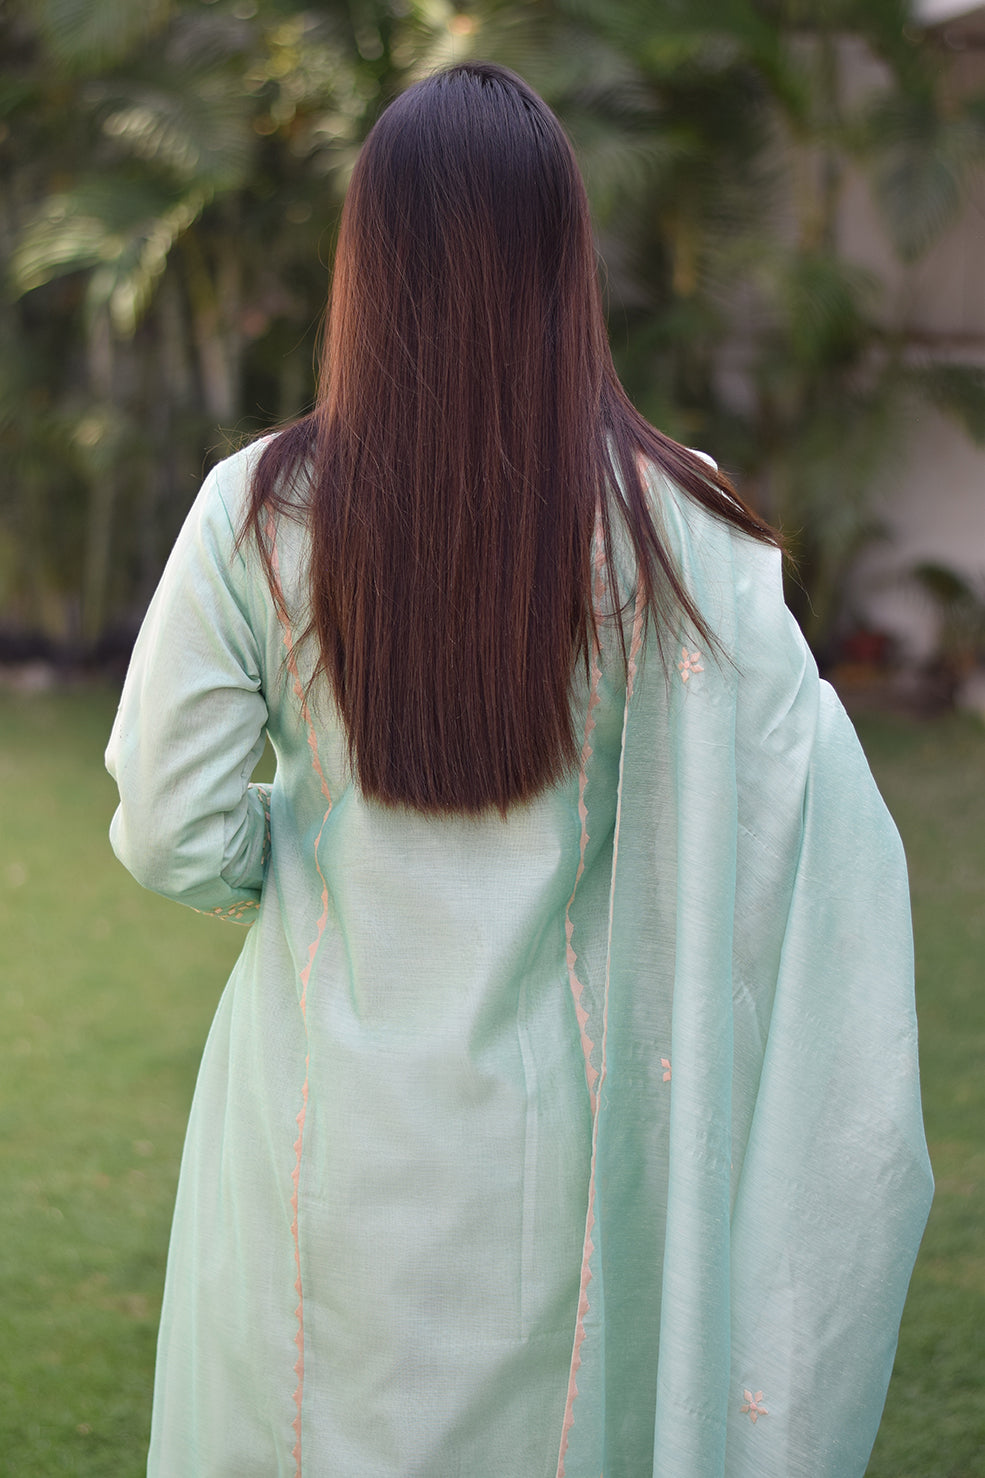 A woman wearing a sea green Aari work kurta with delicate floral embroidery